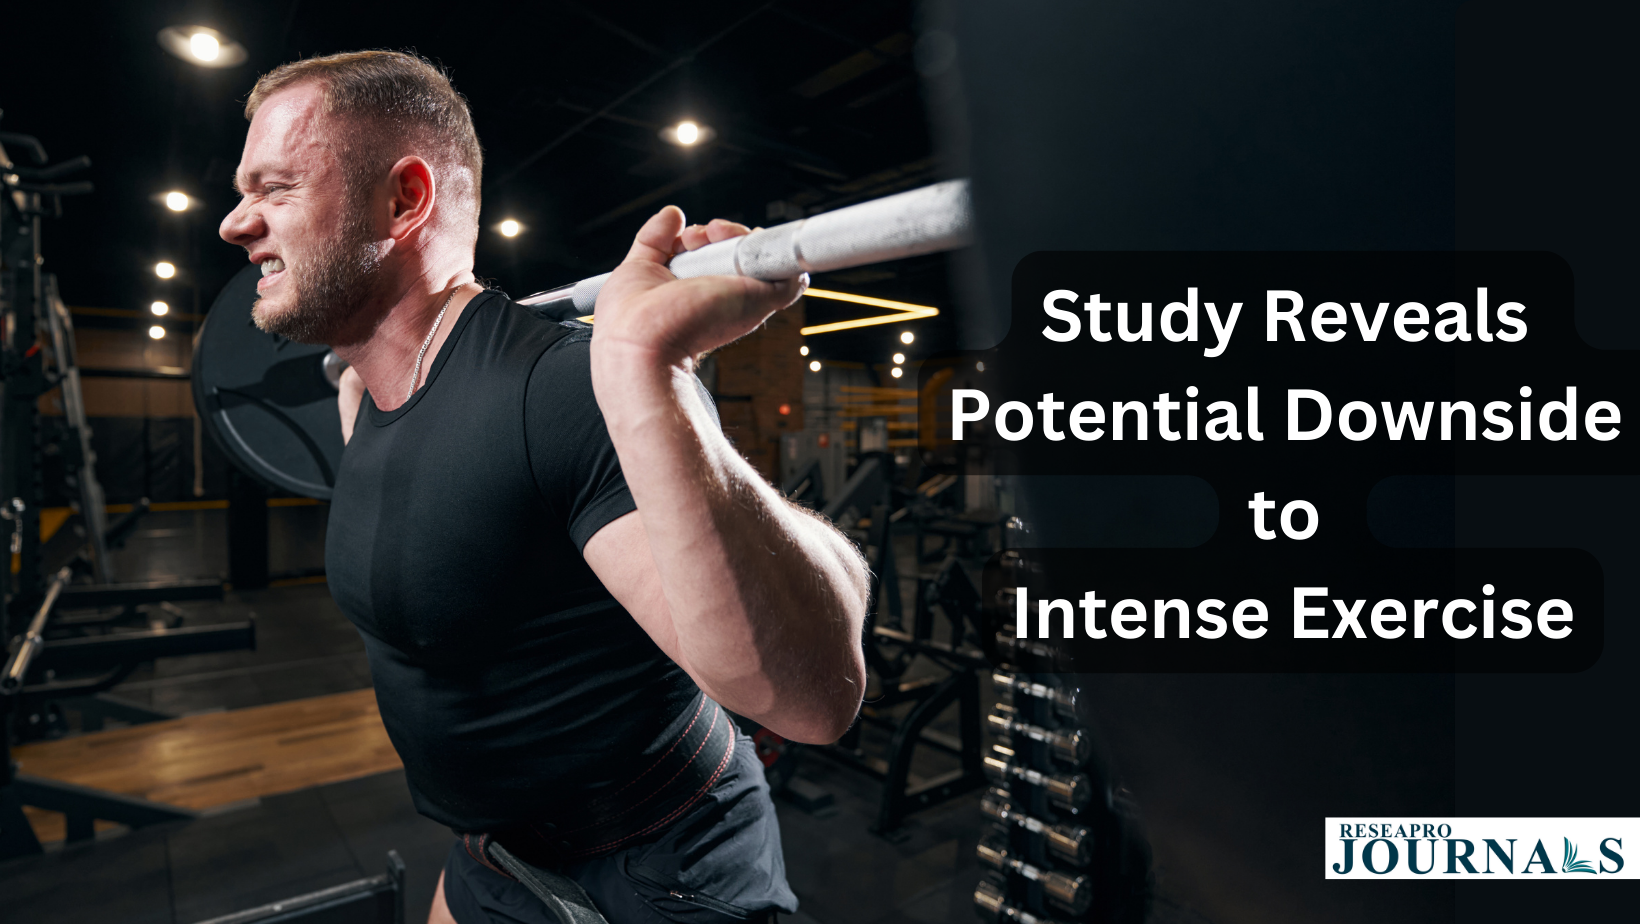 Study Reveals Potential Downside to Intense Exercise